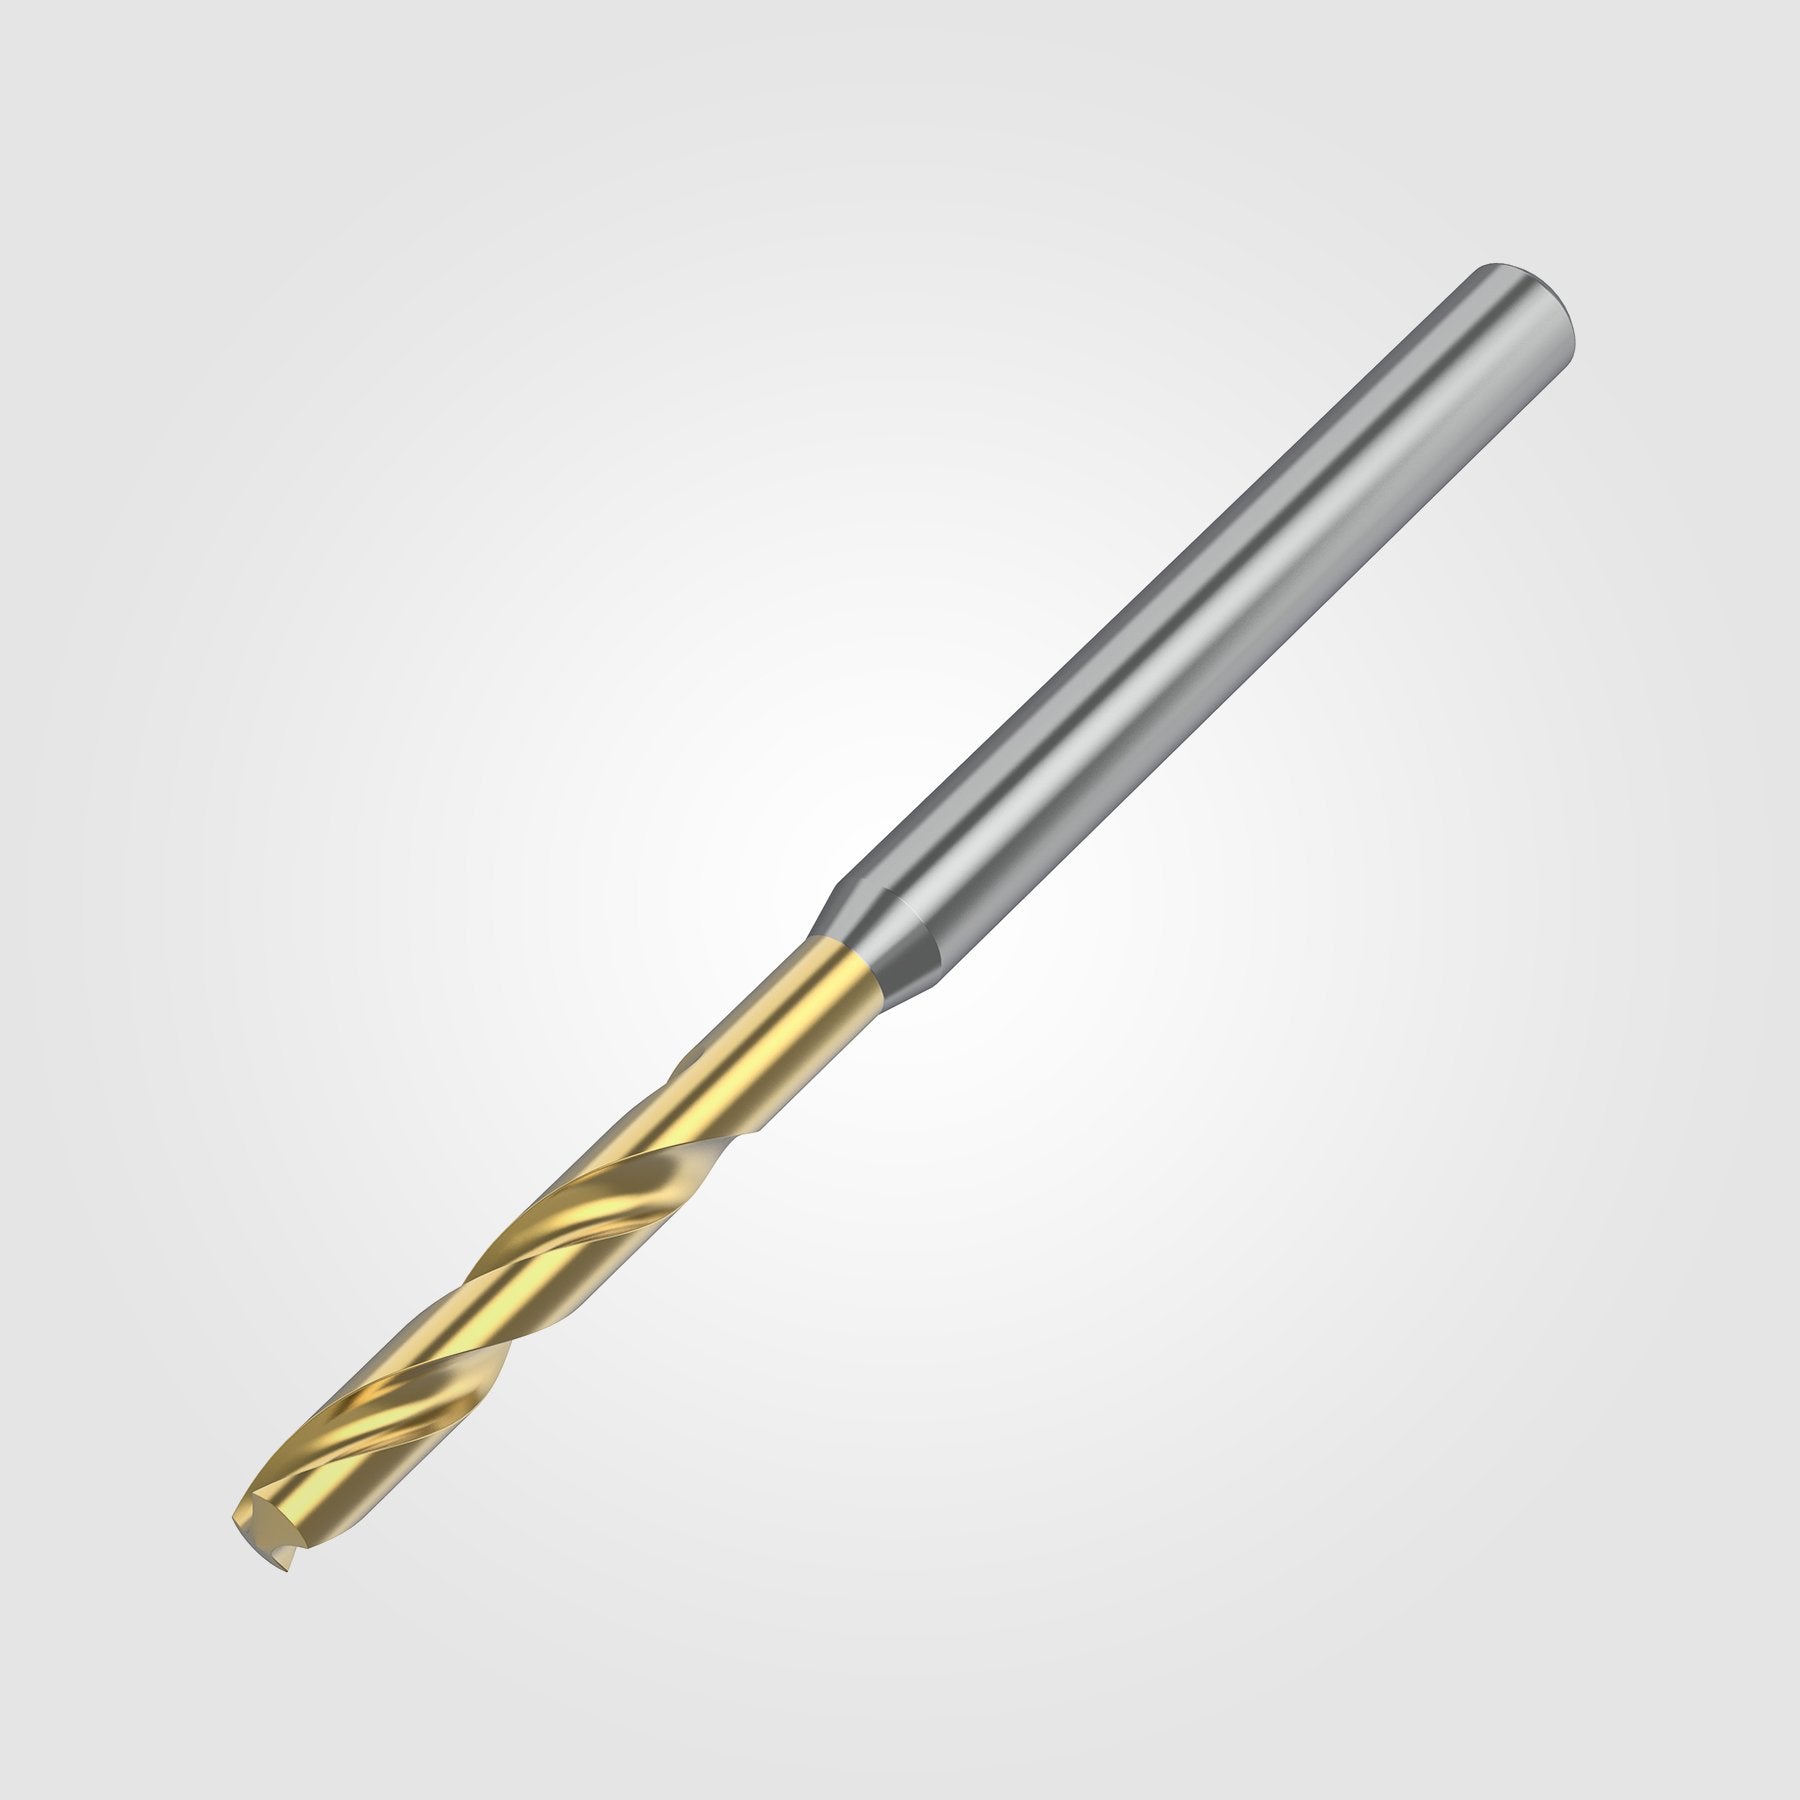 GOdrill (THROUGH COOLANT) | 12.7mm / .5000" / 8xD | SOLID CARBIDE DRILL | 4149766